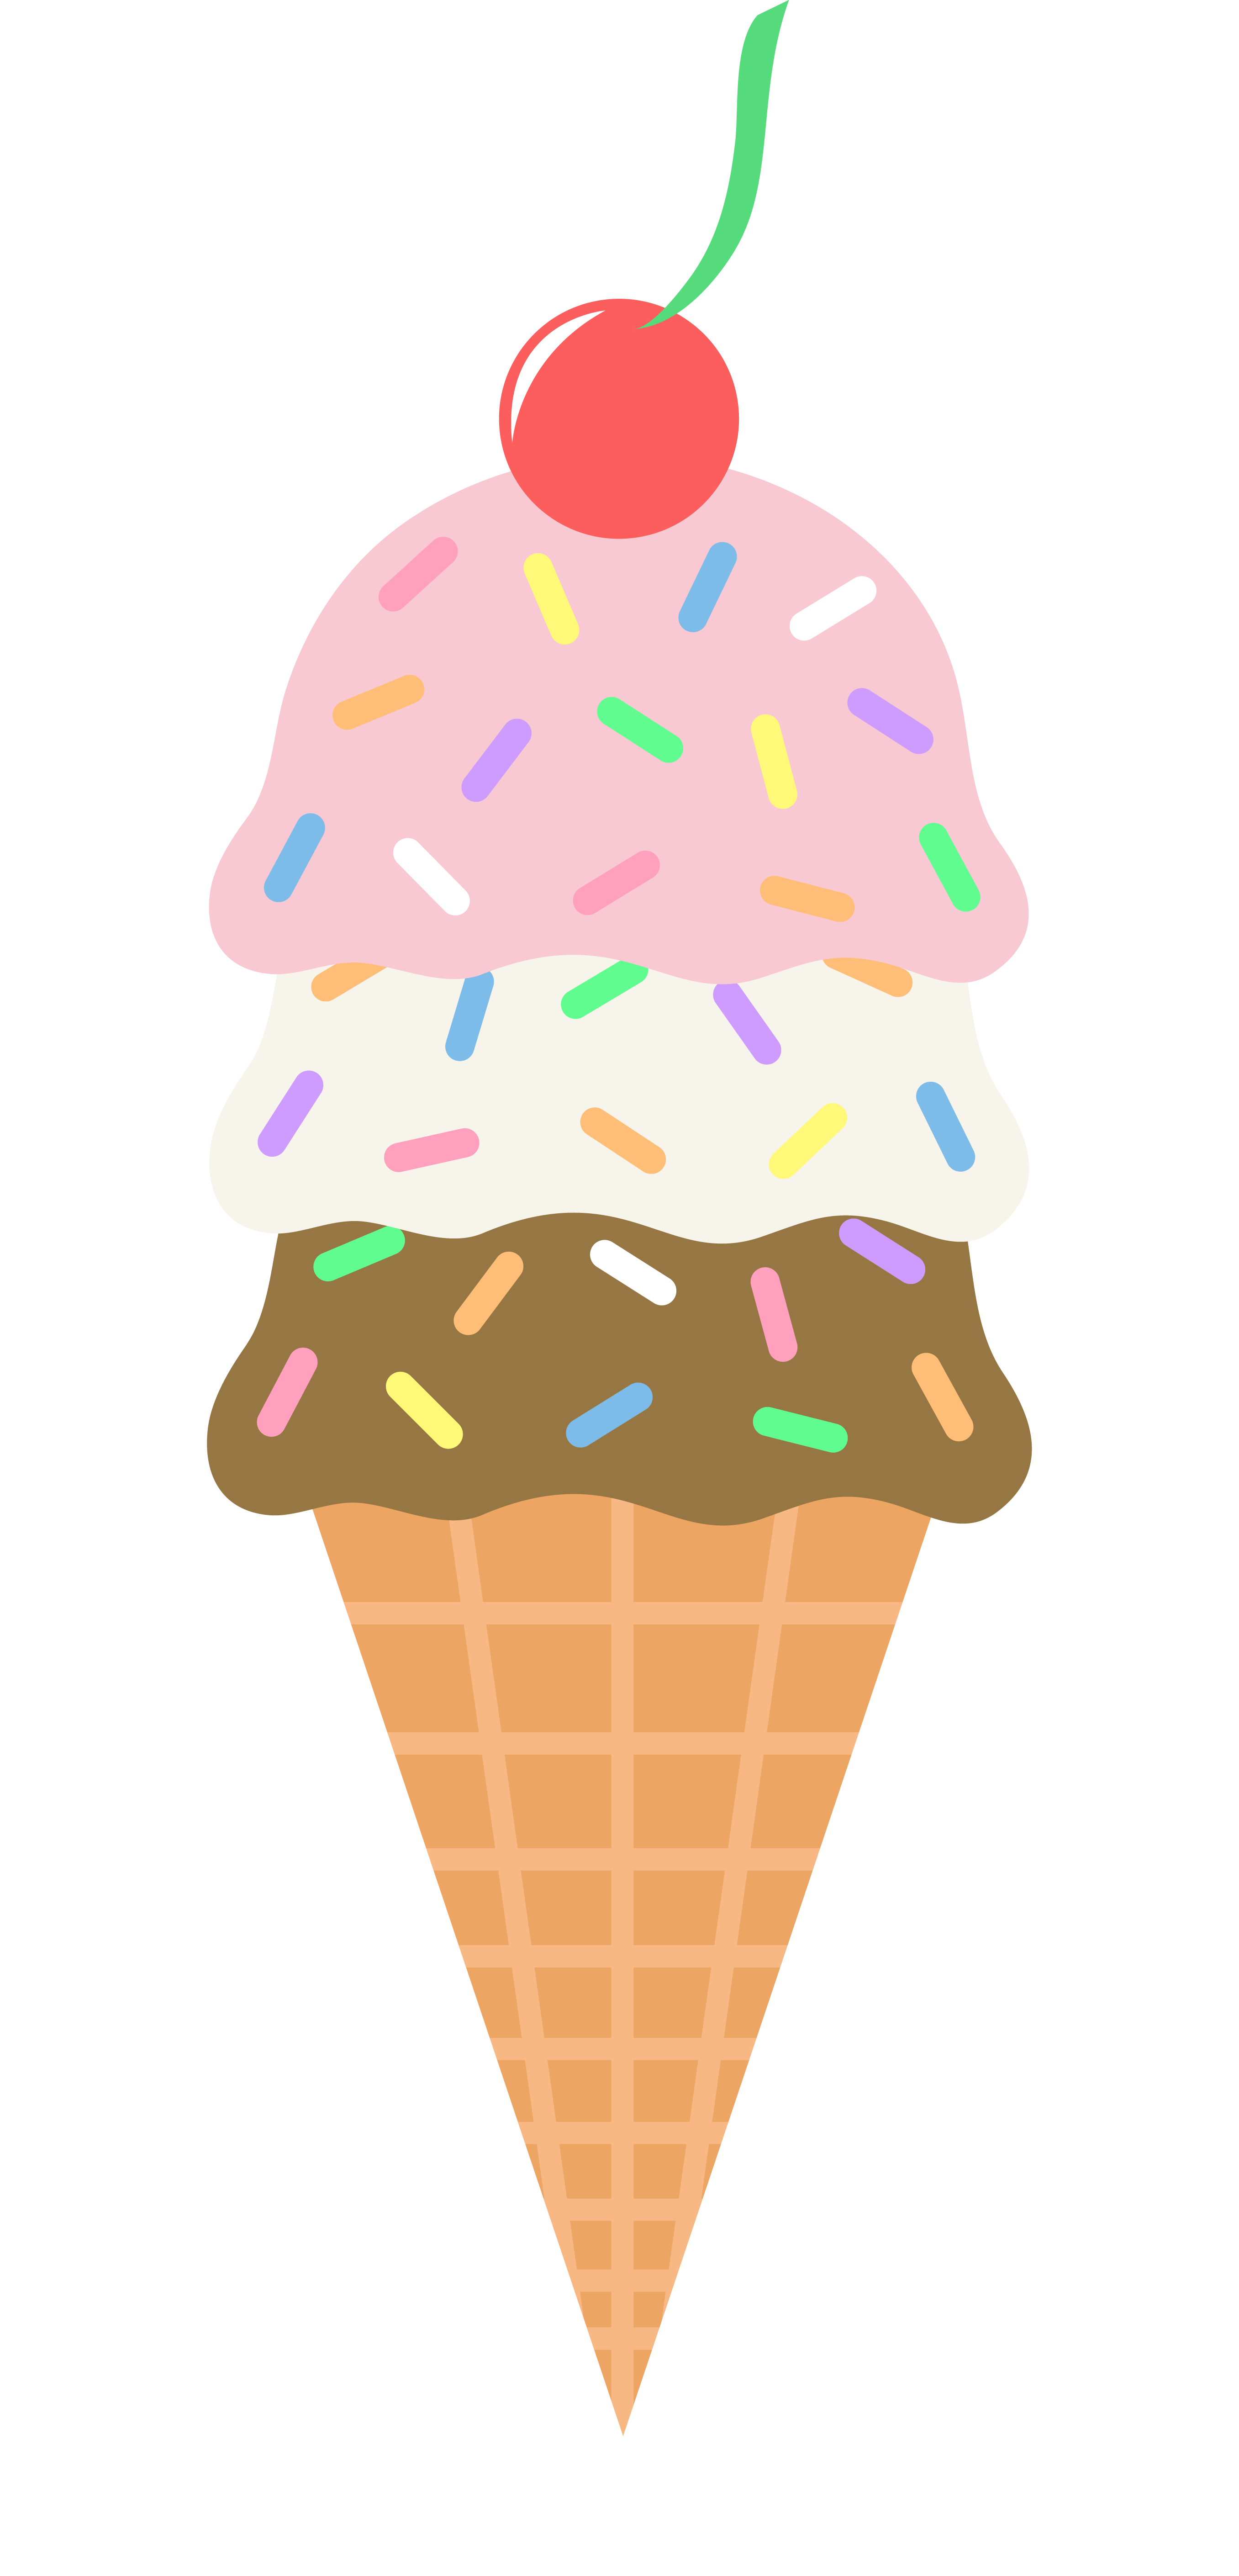 Clip art of neapolitan ice cream cone with sprinkles and a